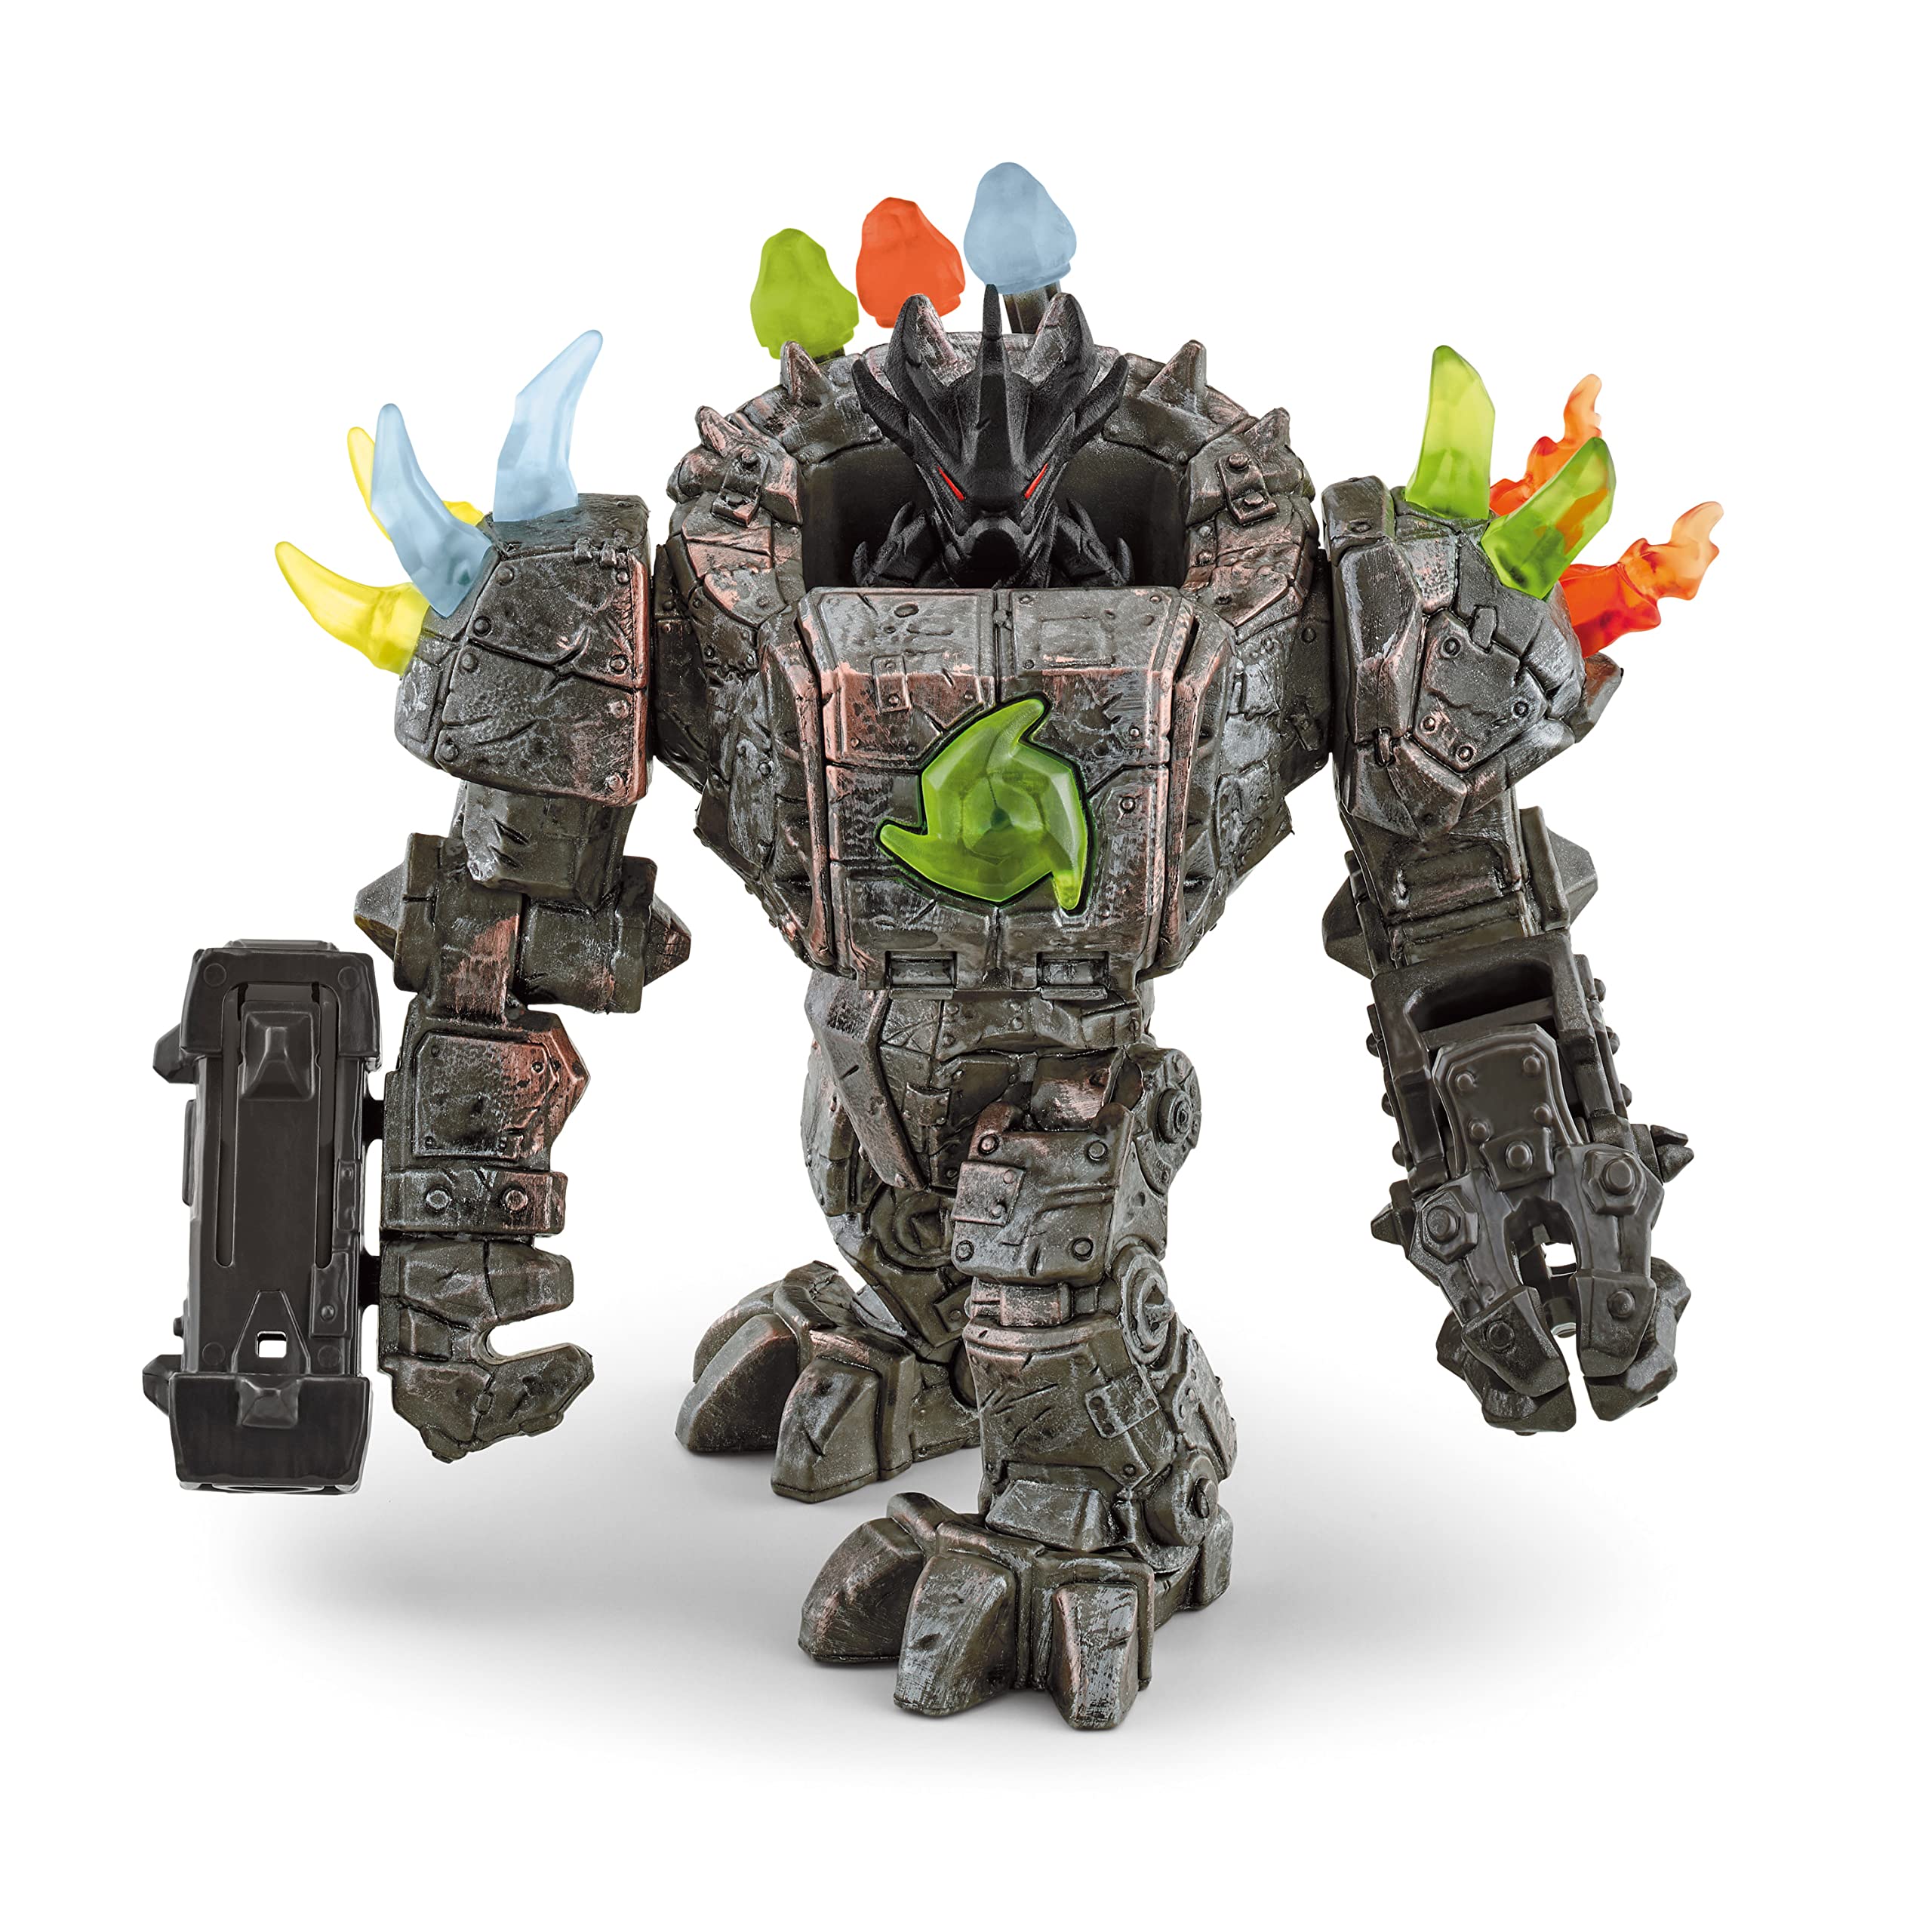 Schleich Eldrador 20-Piece Robot Toy Playset for Boys and Girls Ages 7+, Master Robot with Mini Creature, Multi